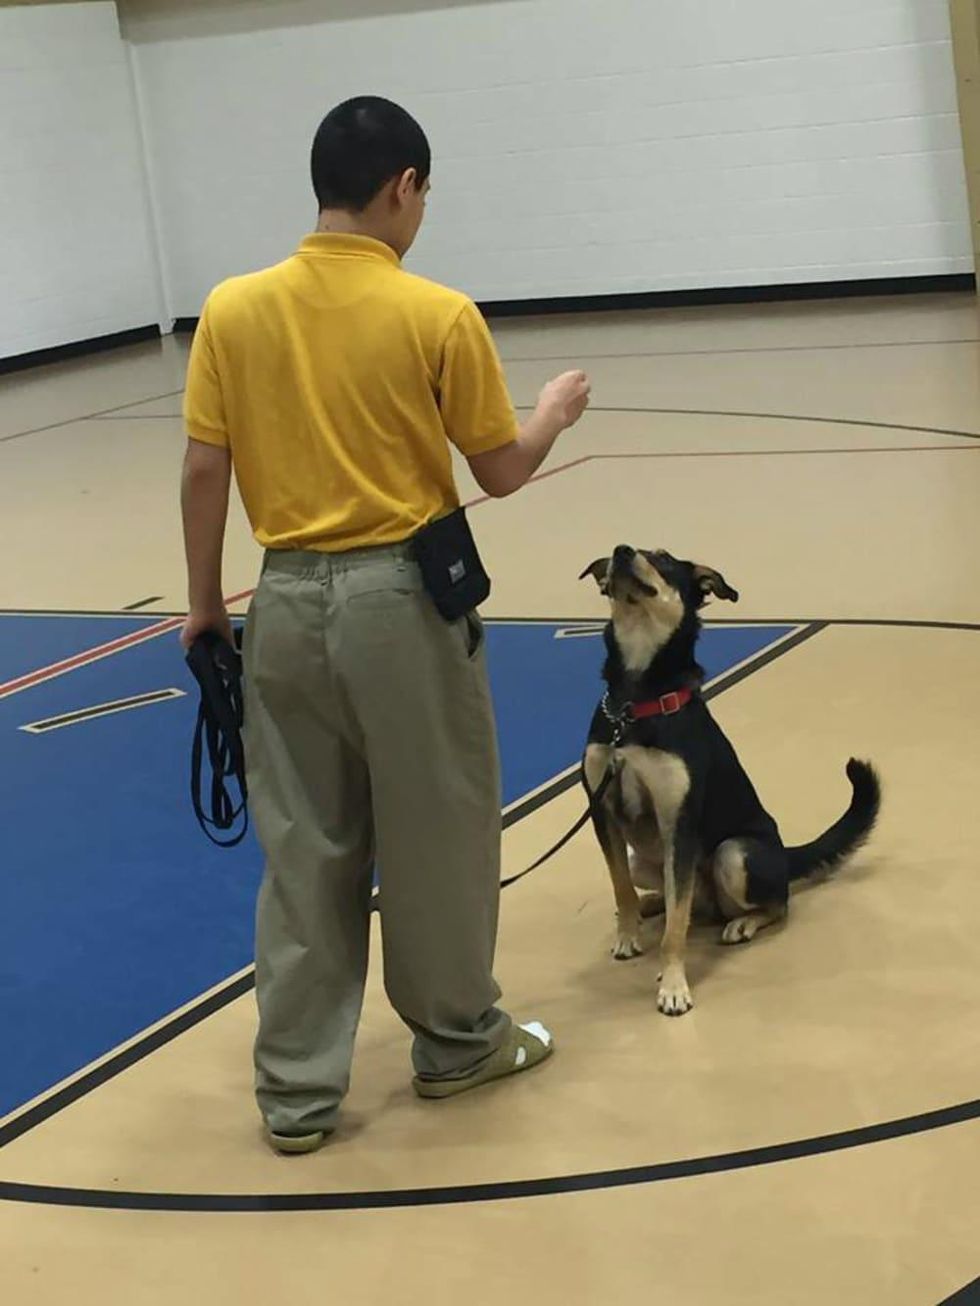 Youth With Faces PREP dog training program teaches patience, responsibility, empathy and partnership